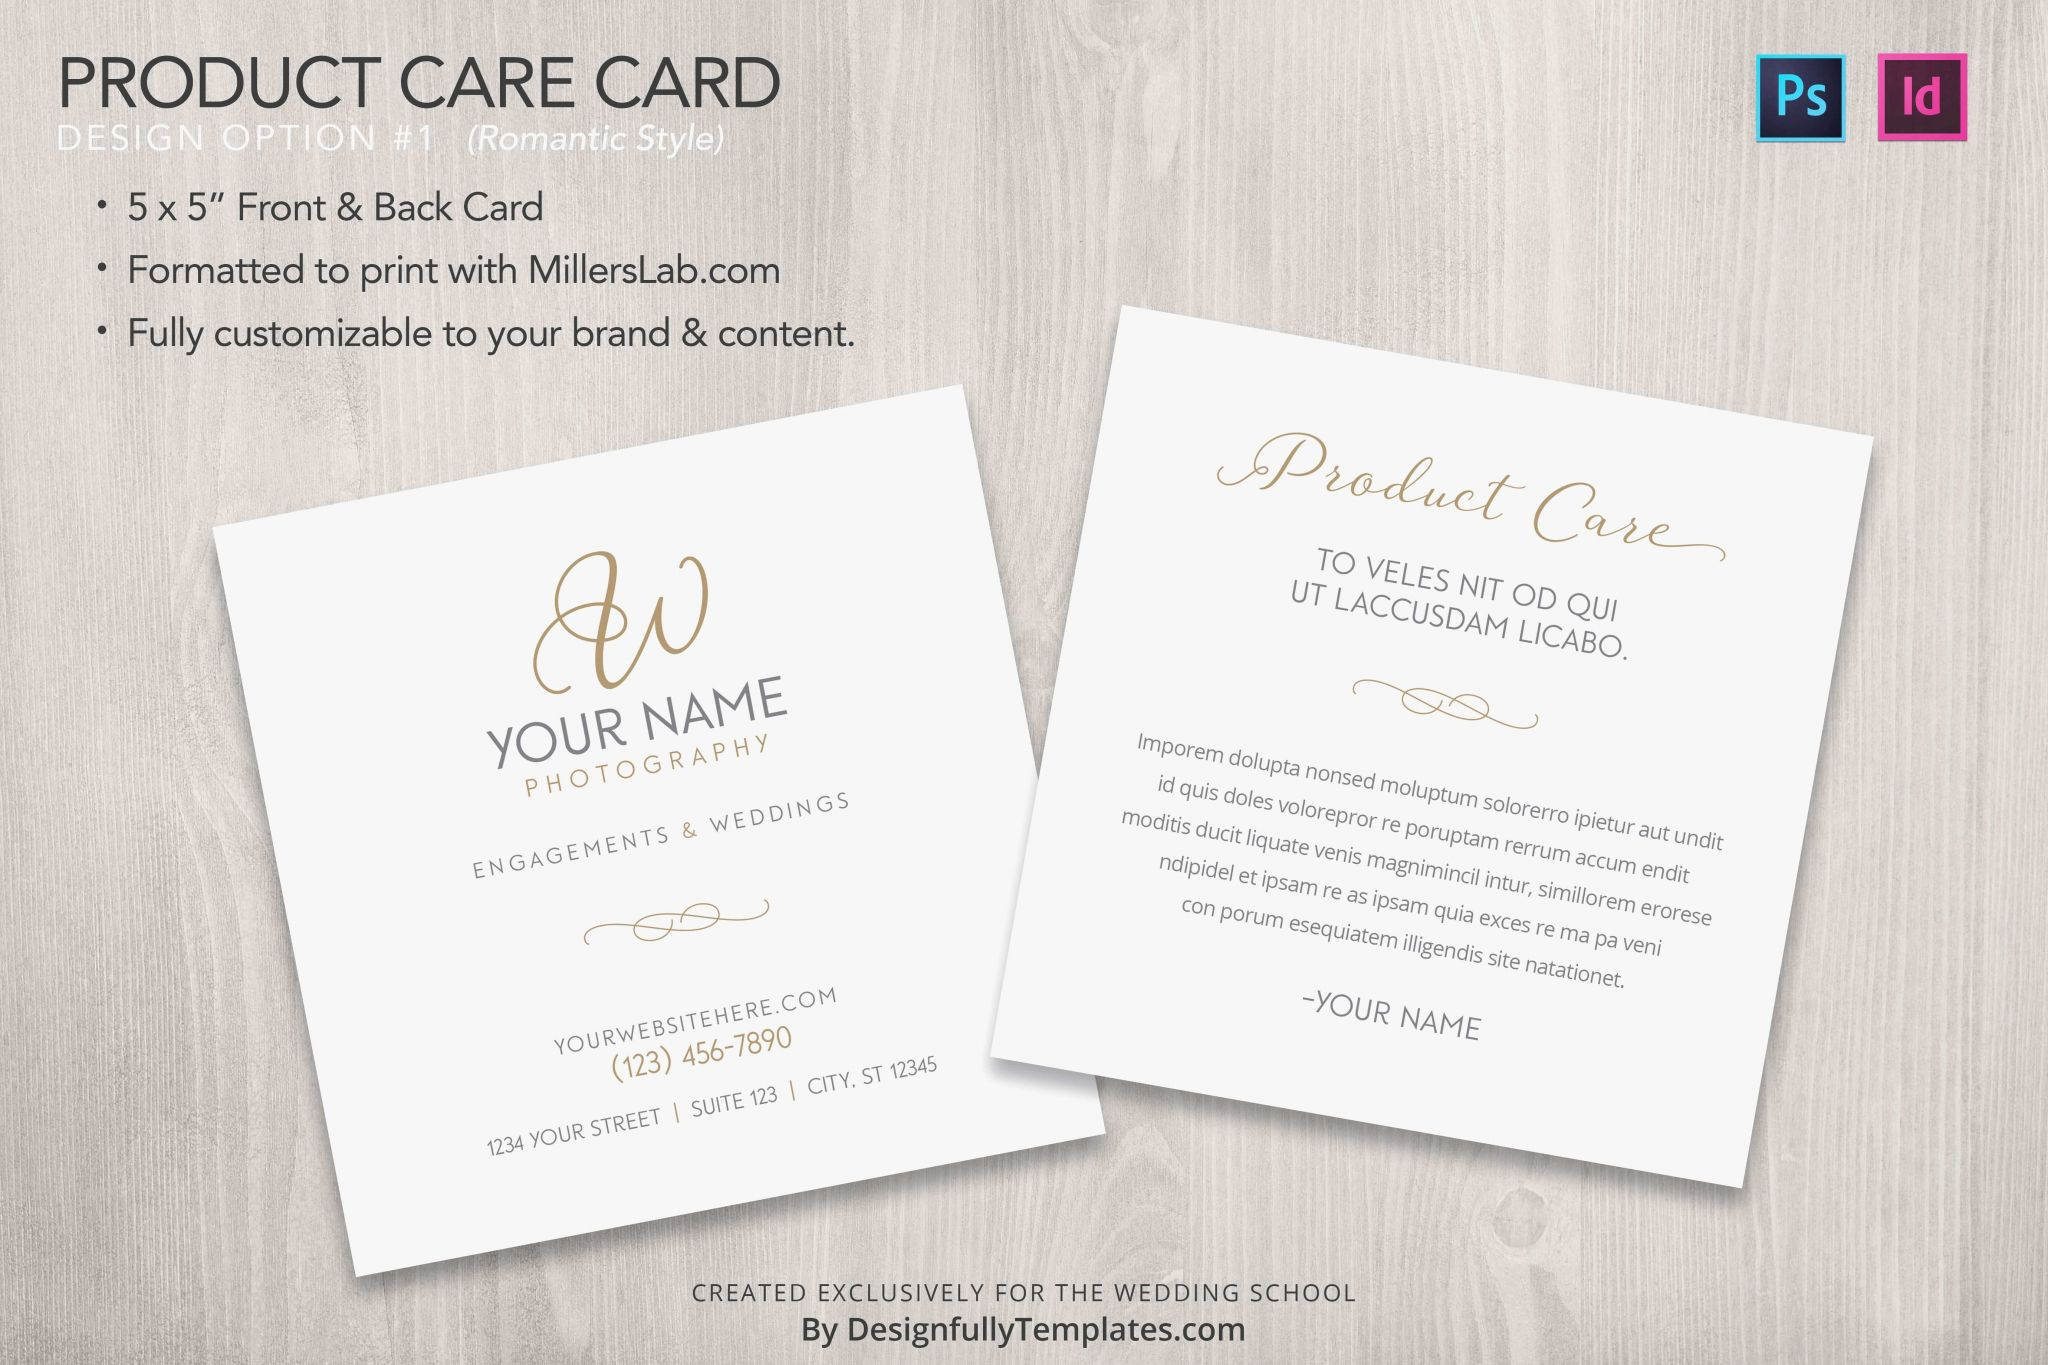 Free Place Card Templates 6 Per Page - Atlantaauctionco With Place Card Template 6 Per Sheet